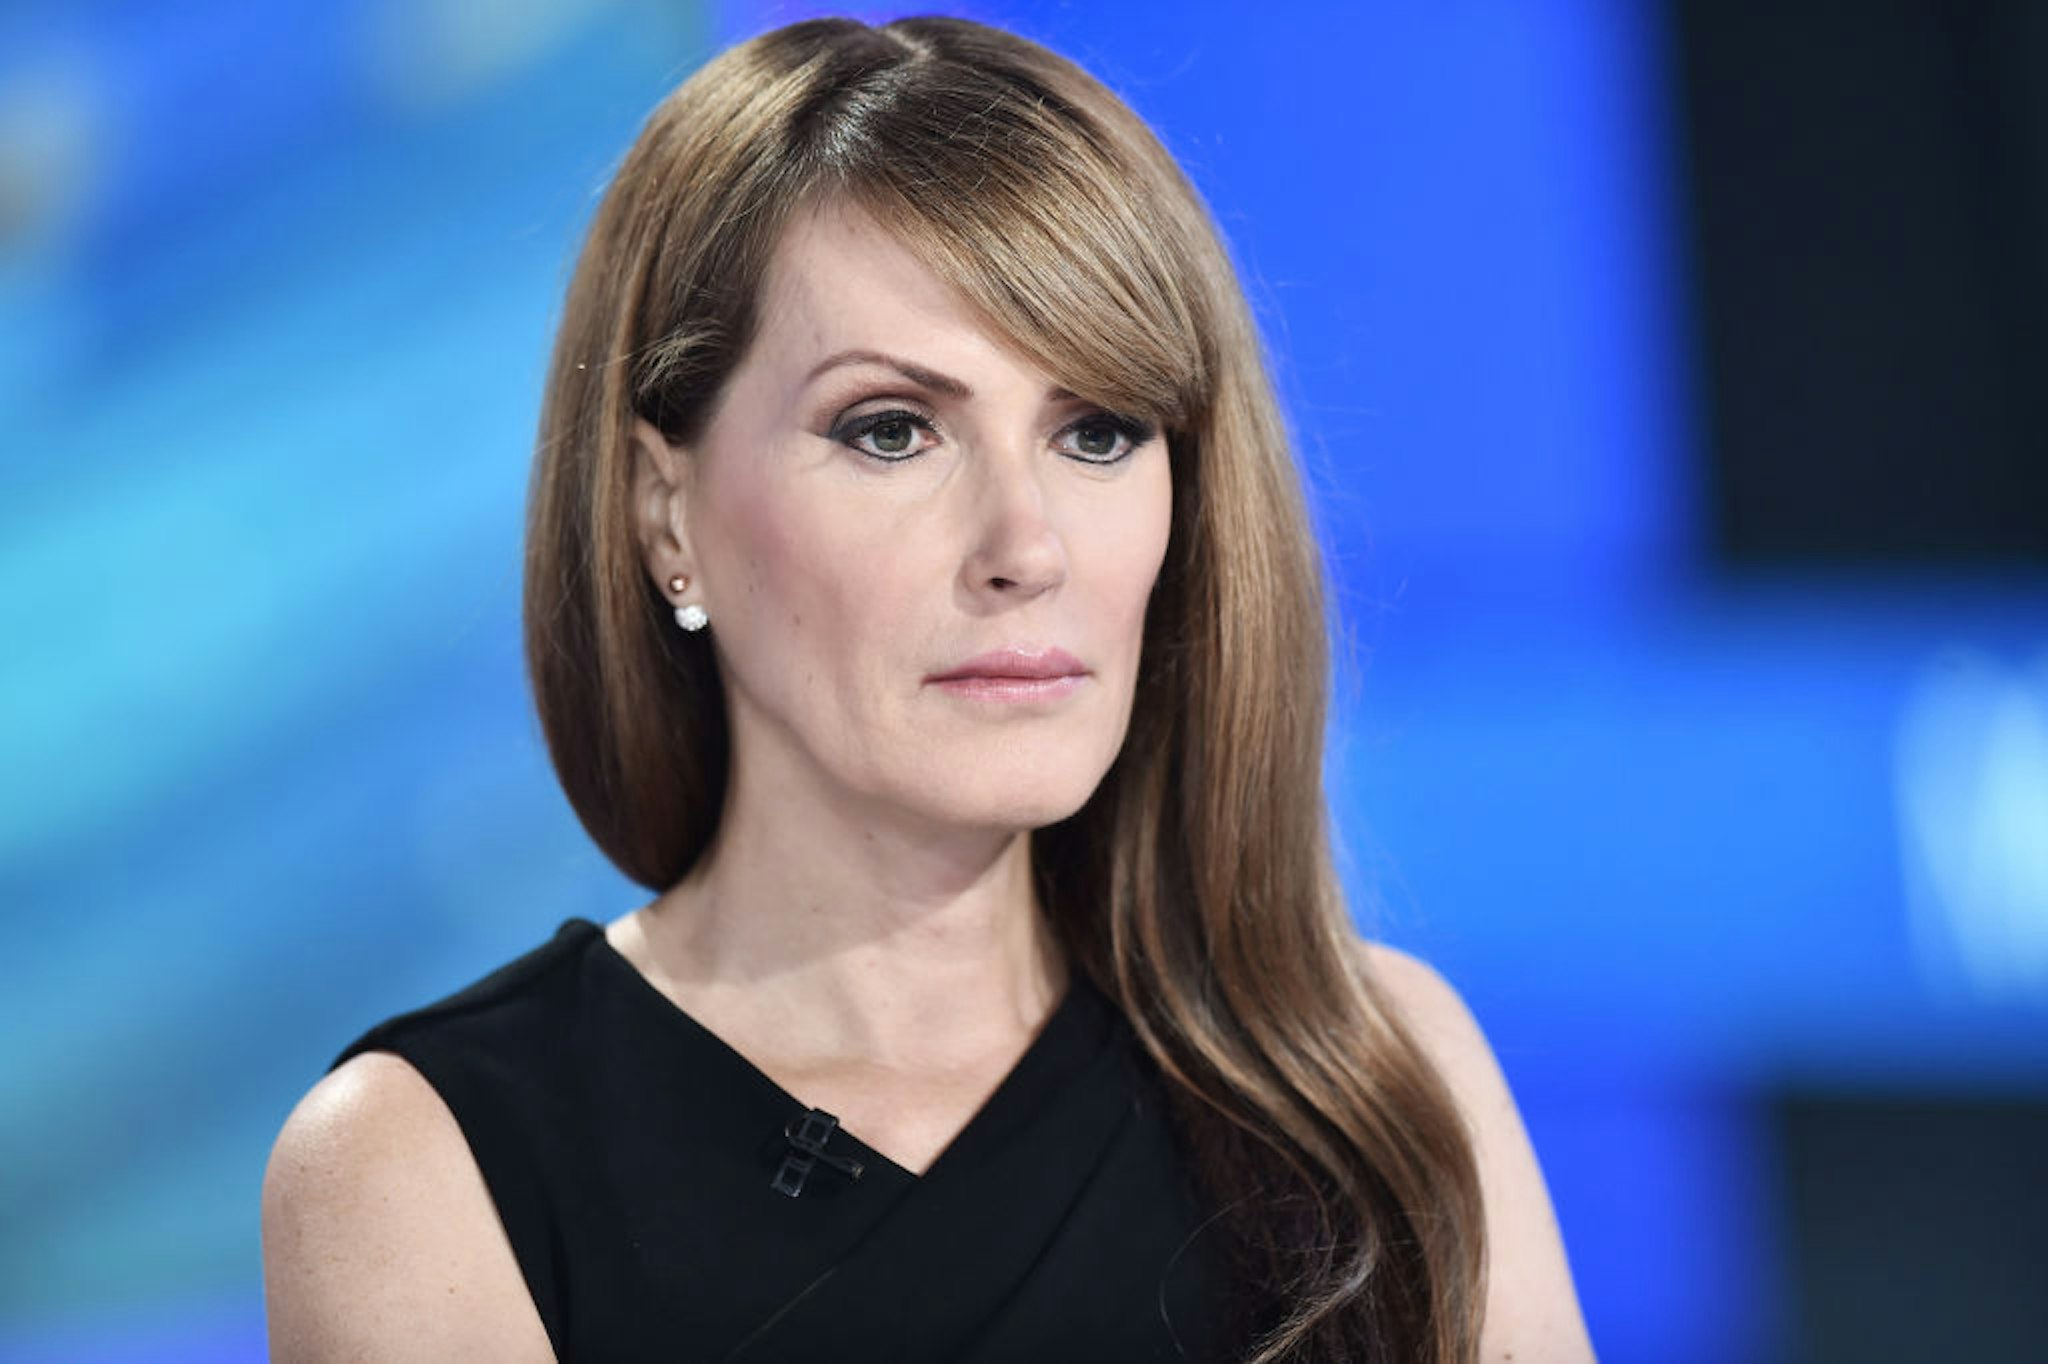 NEW YORK, NEW YORK - SEPTEMBER 11: (EXCLUSIVE COVERAGE) Dagen McDowell visits "Mornings With Maria" hosted by Maria Bartiromo at Fox Business Network Studios on September 11, 2019 in New York City. (Photo by Steven Ferdman/Getty Images)